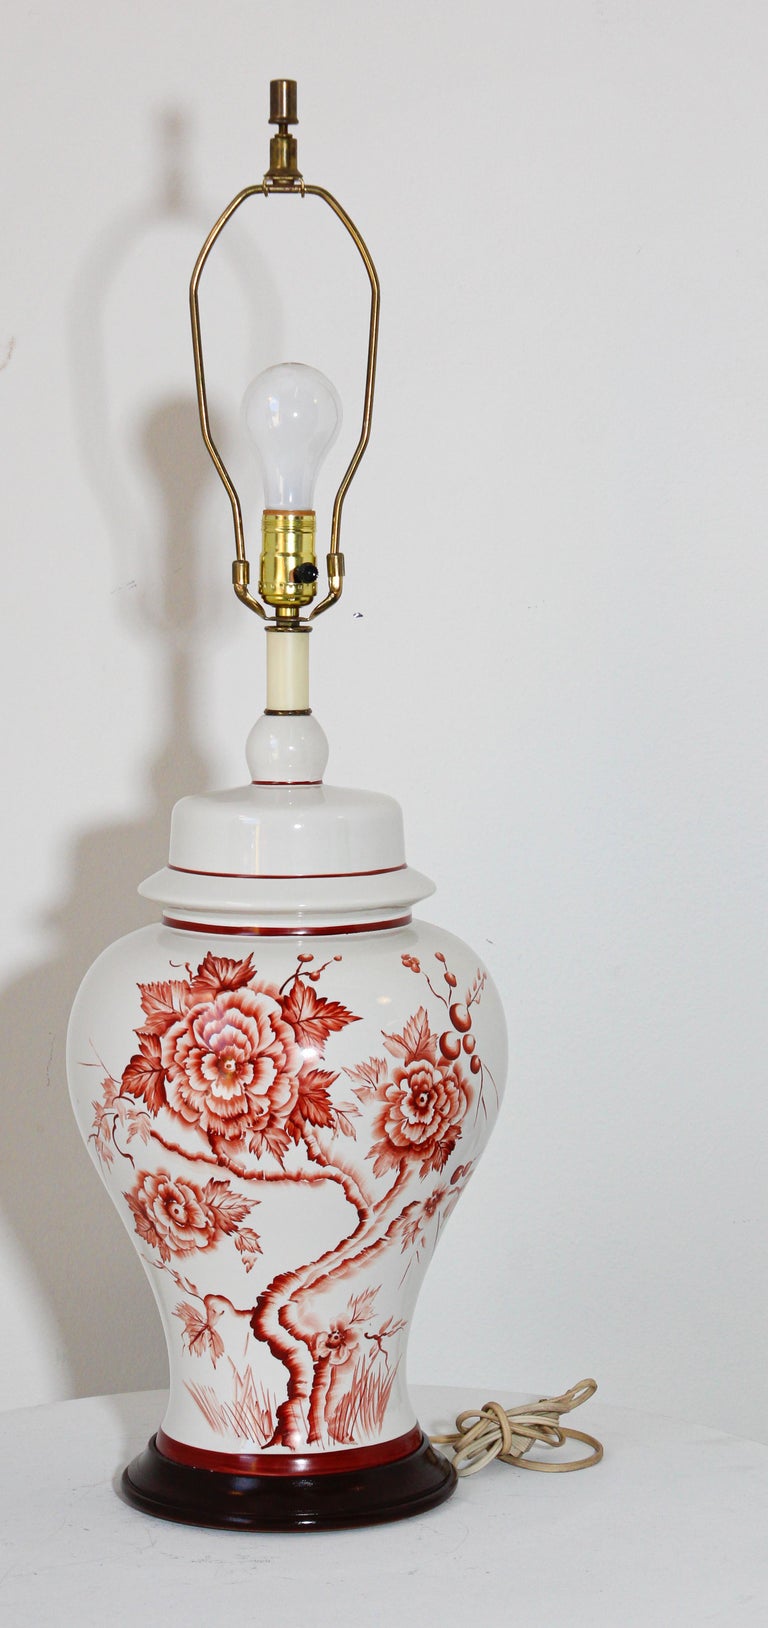 Vintage Chinese White Porcelain Jar Table Lamp In Good Condition For Sale In North Hollywood, CA